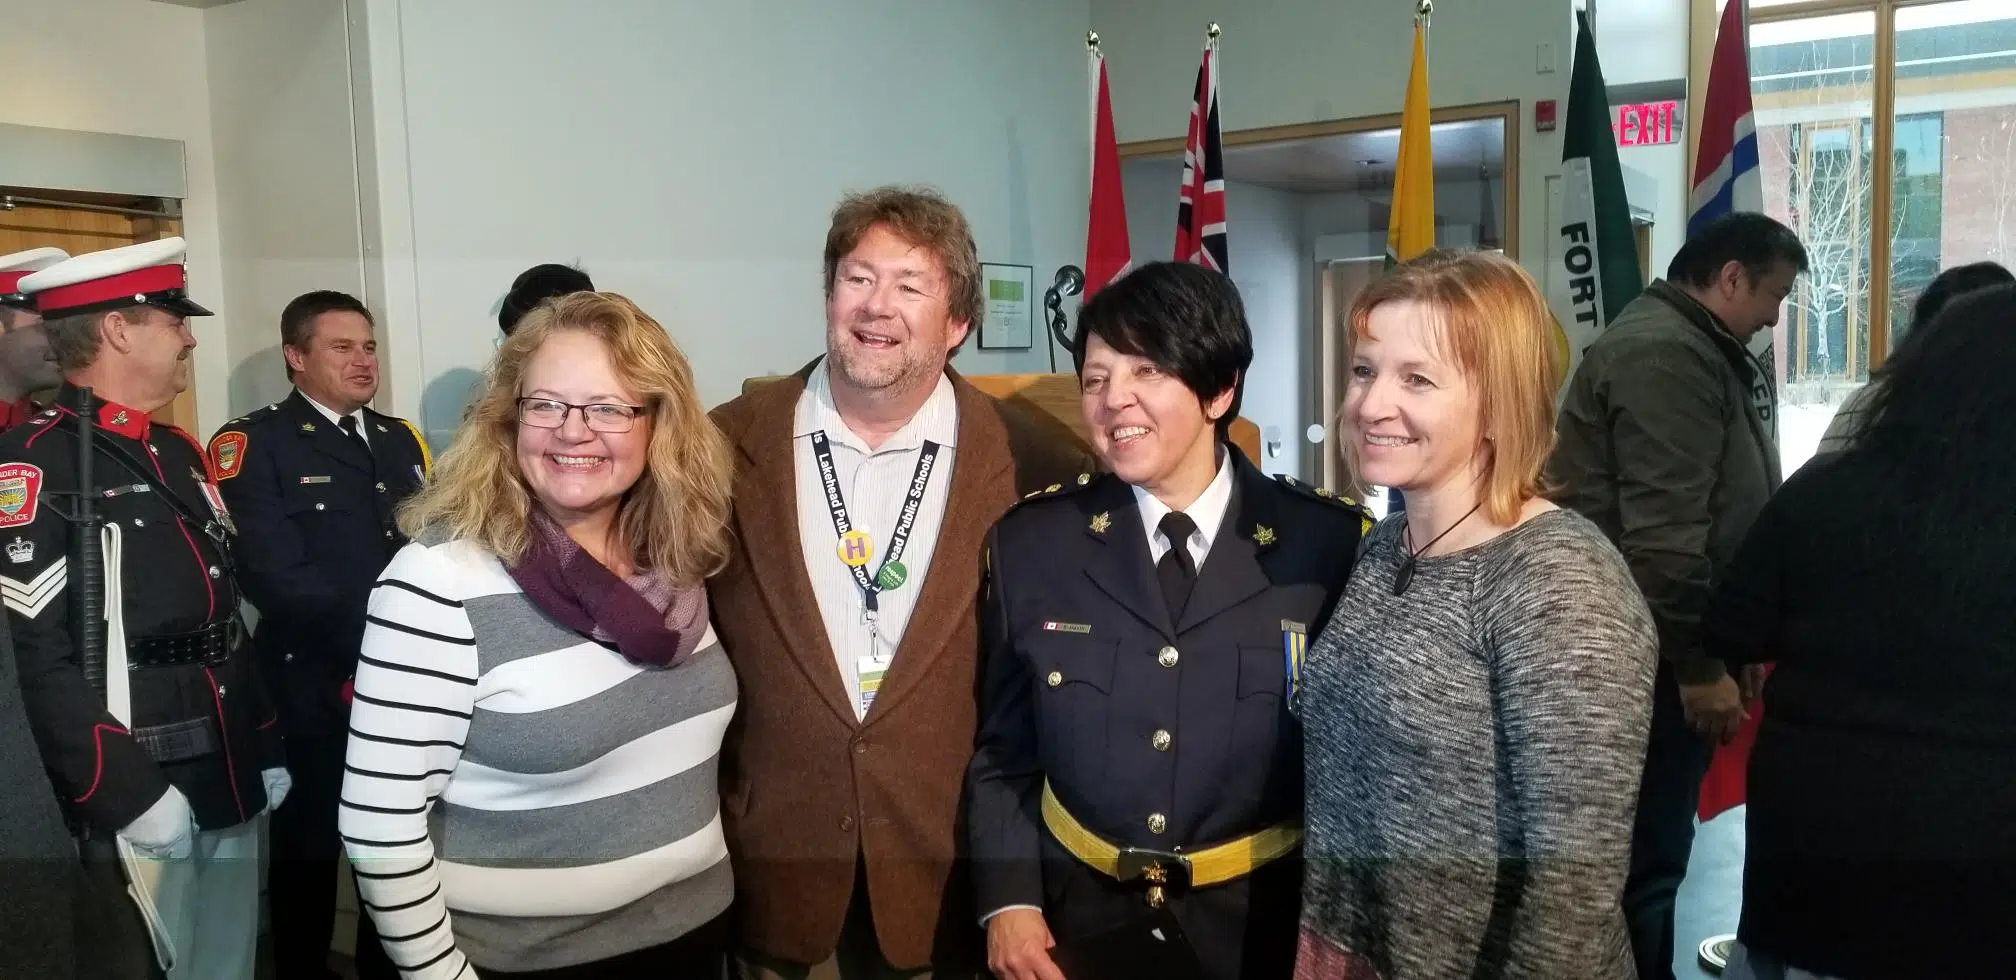 VIDEO:  Sylvie Hauth Sworn In As Police Chief